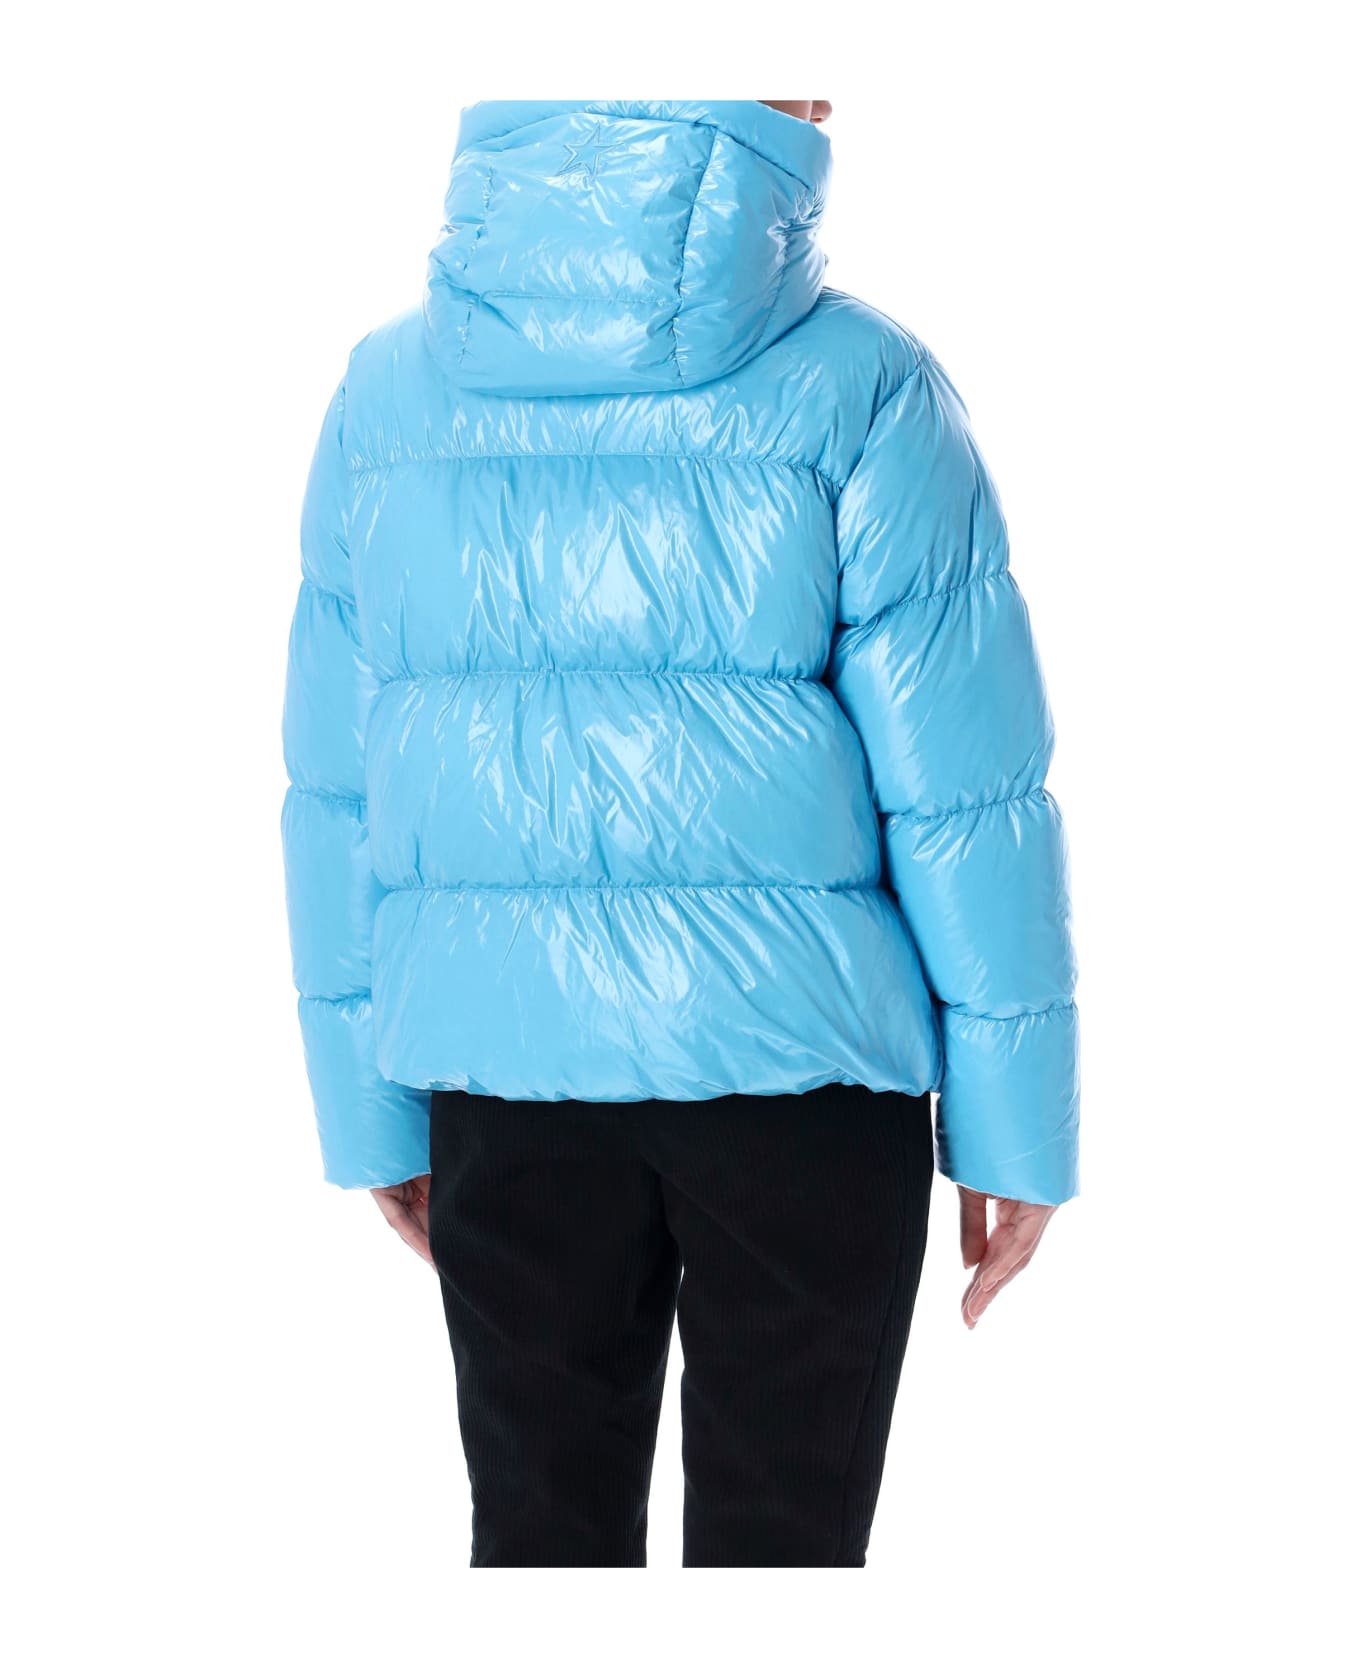 Perfect Moment January Down Jacket - SKY BLUE